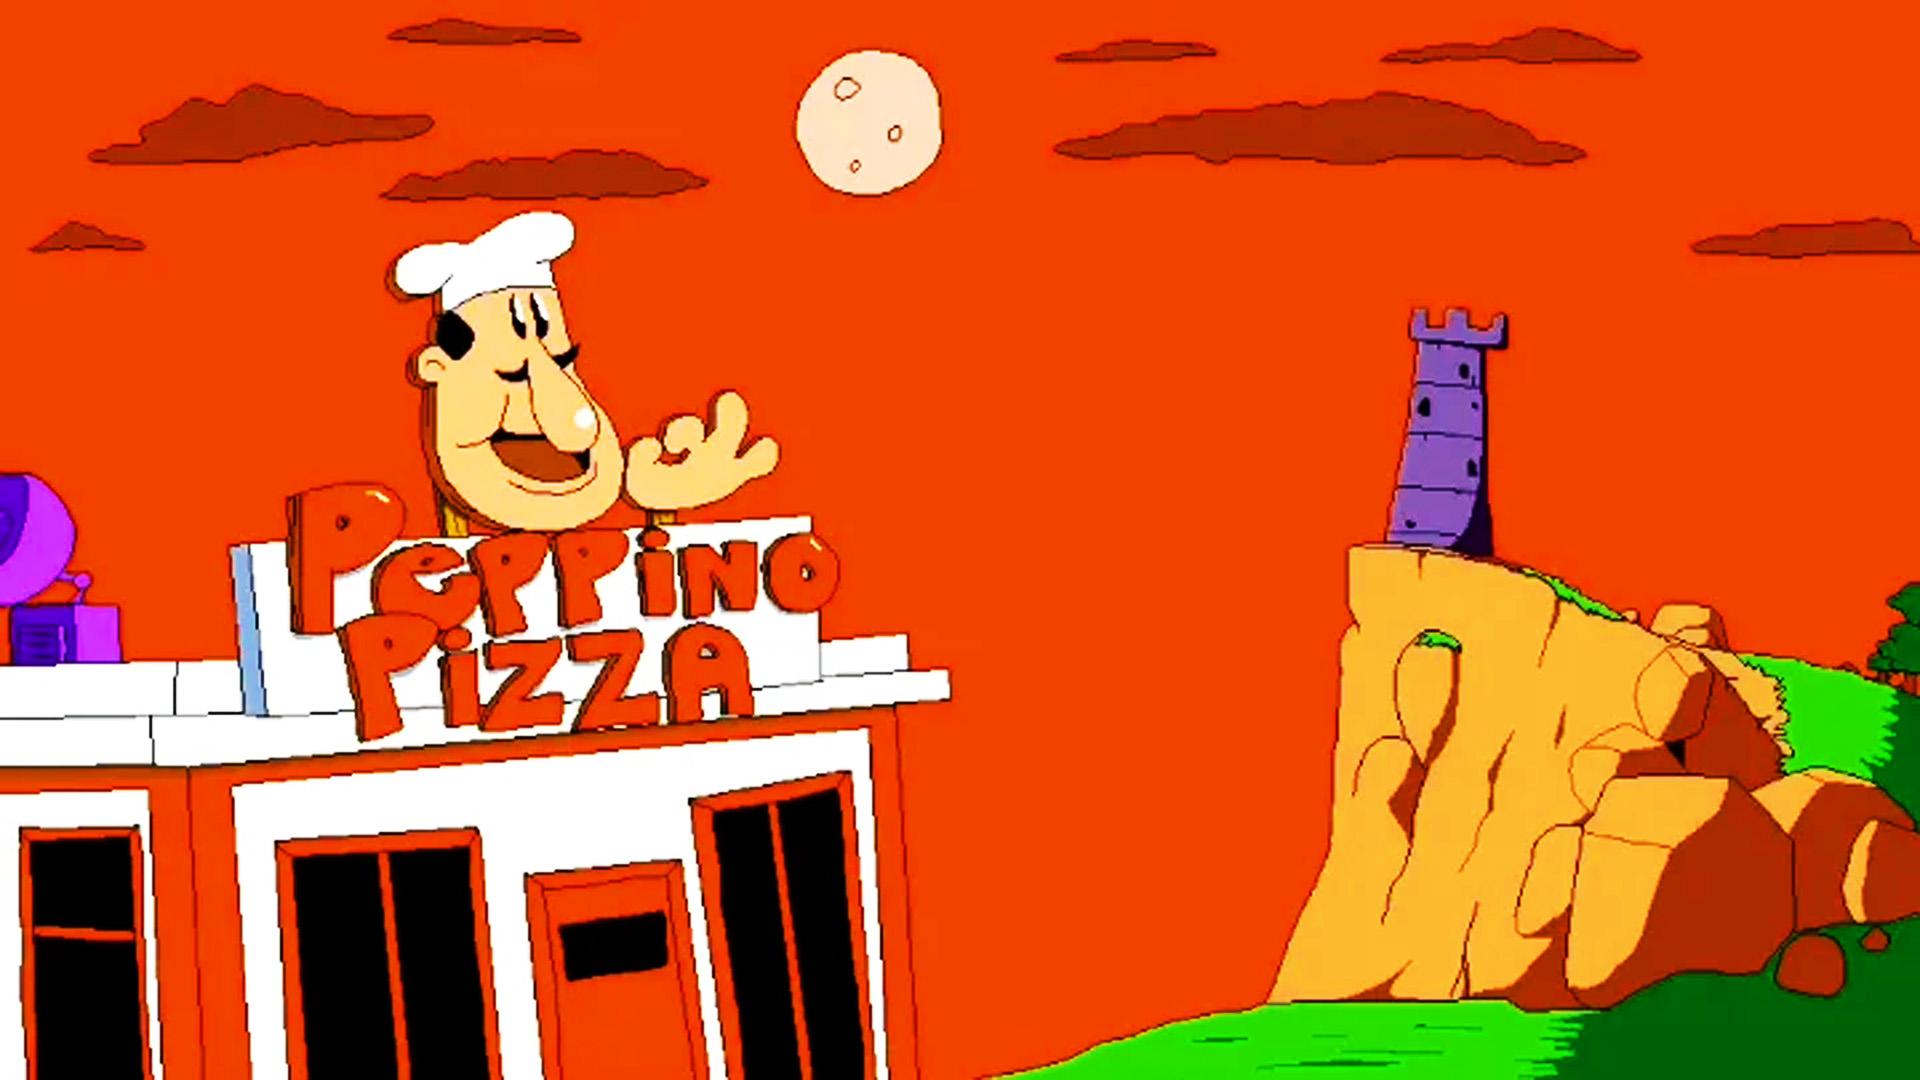 Pizza tower gameplay. Pizza Tower игра. Пеппино pizza Tower. Пепино спагетти pizza Tower. Пицо ТАВЕО.